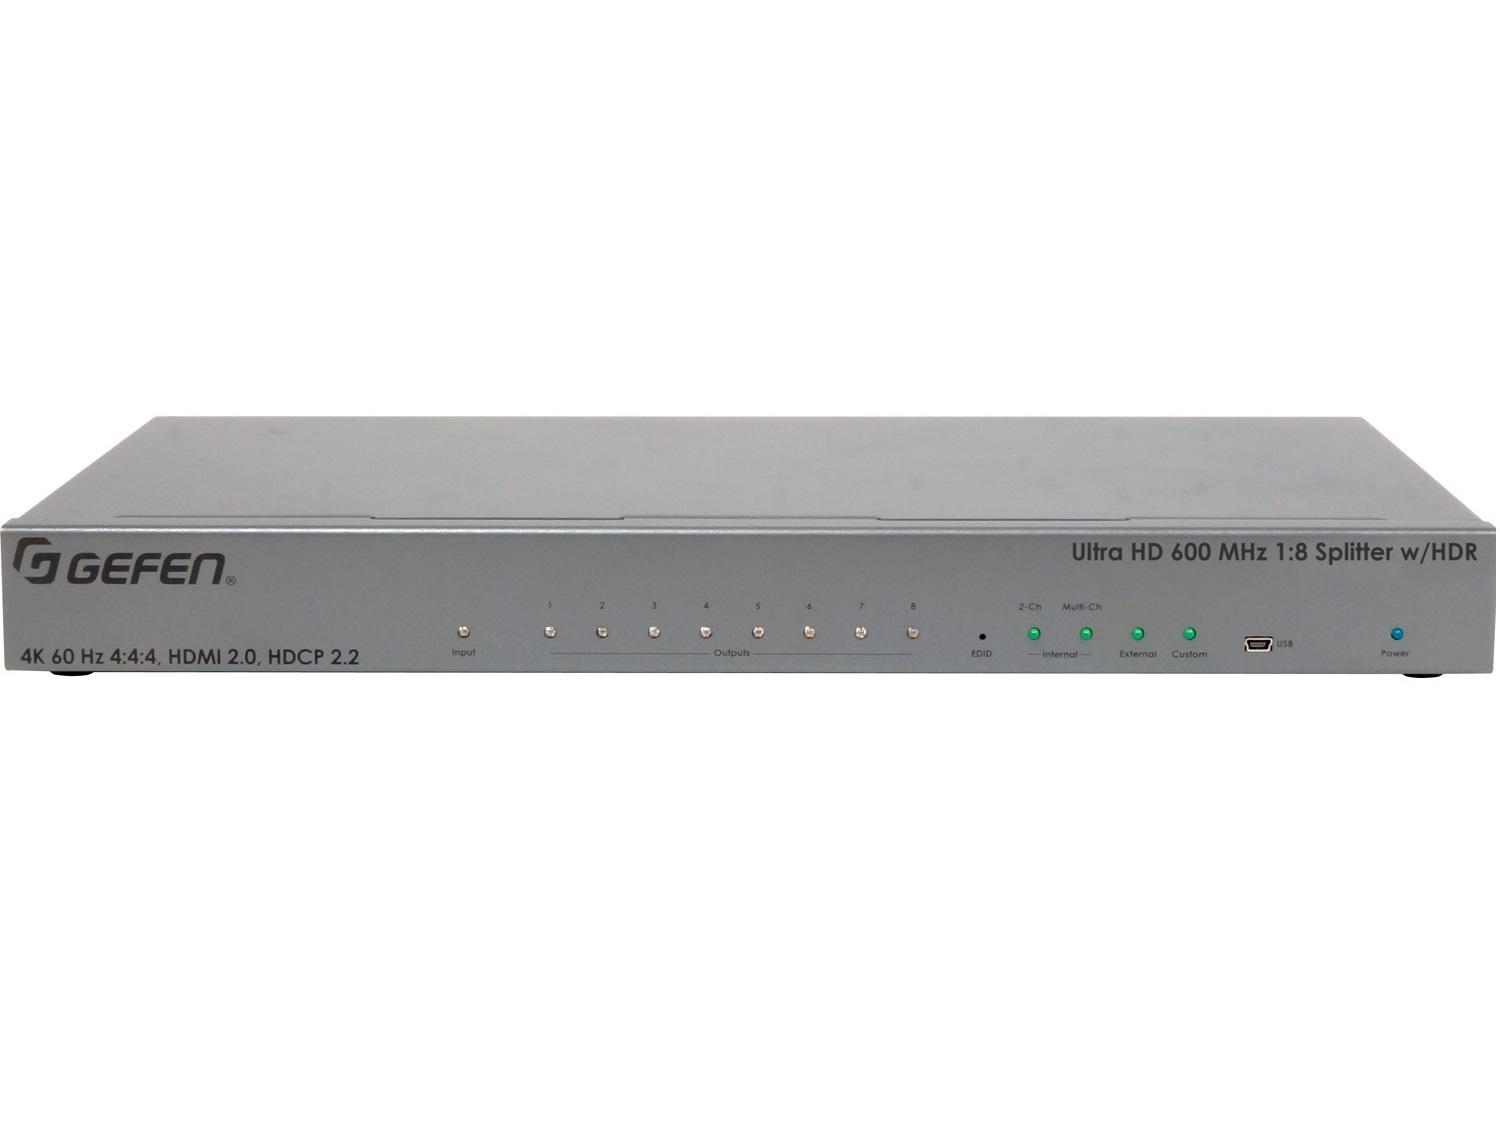 EXT-UHD600-18 4K Ultra HD 600 MHz 1x8 Splitter with HDR by Gefen